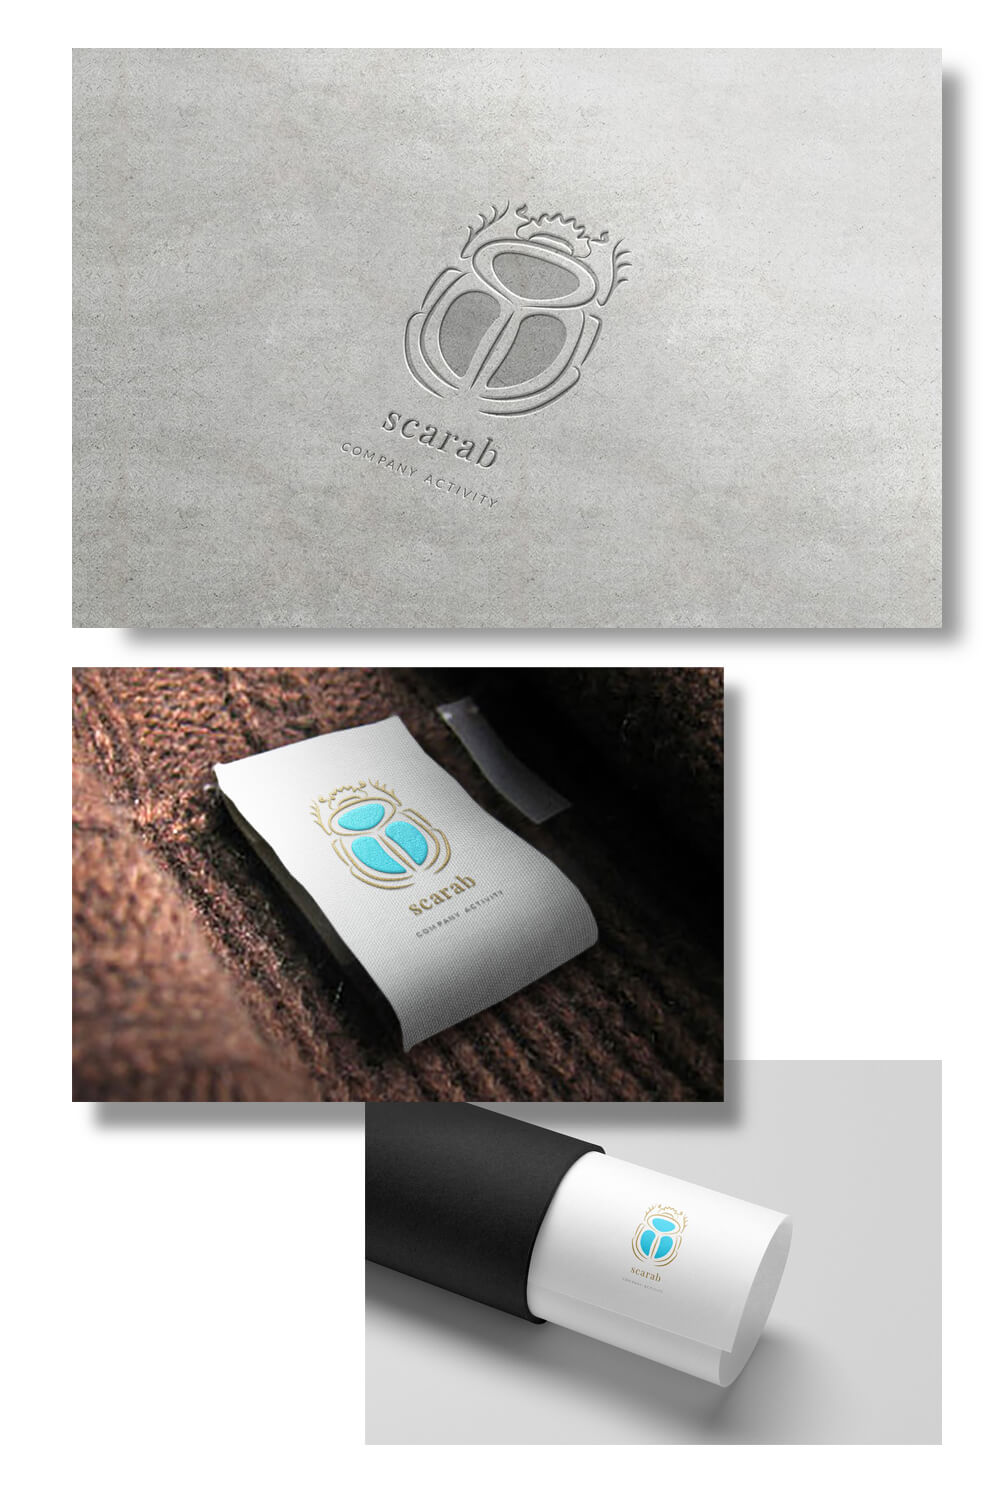 Several options for applying the scarab logo on different textures.